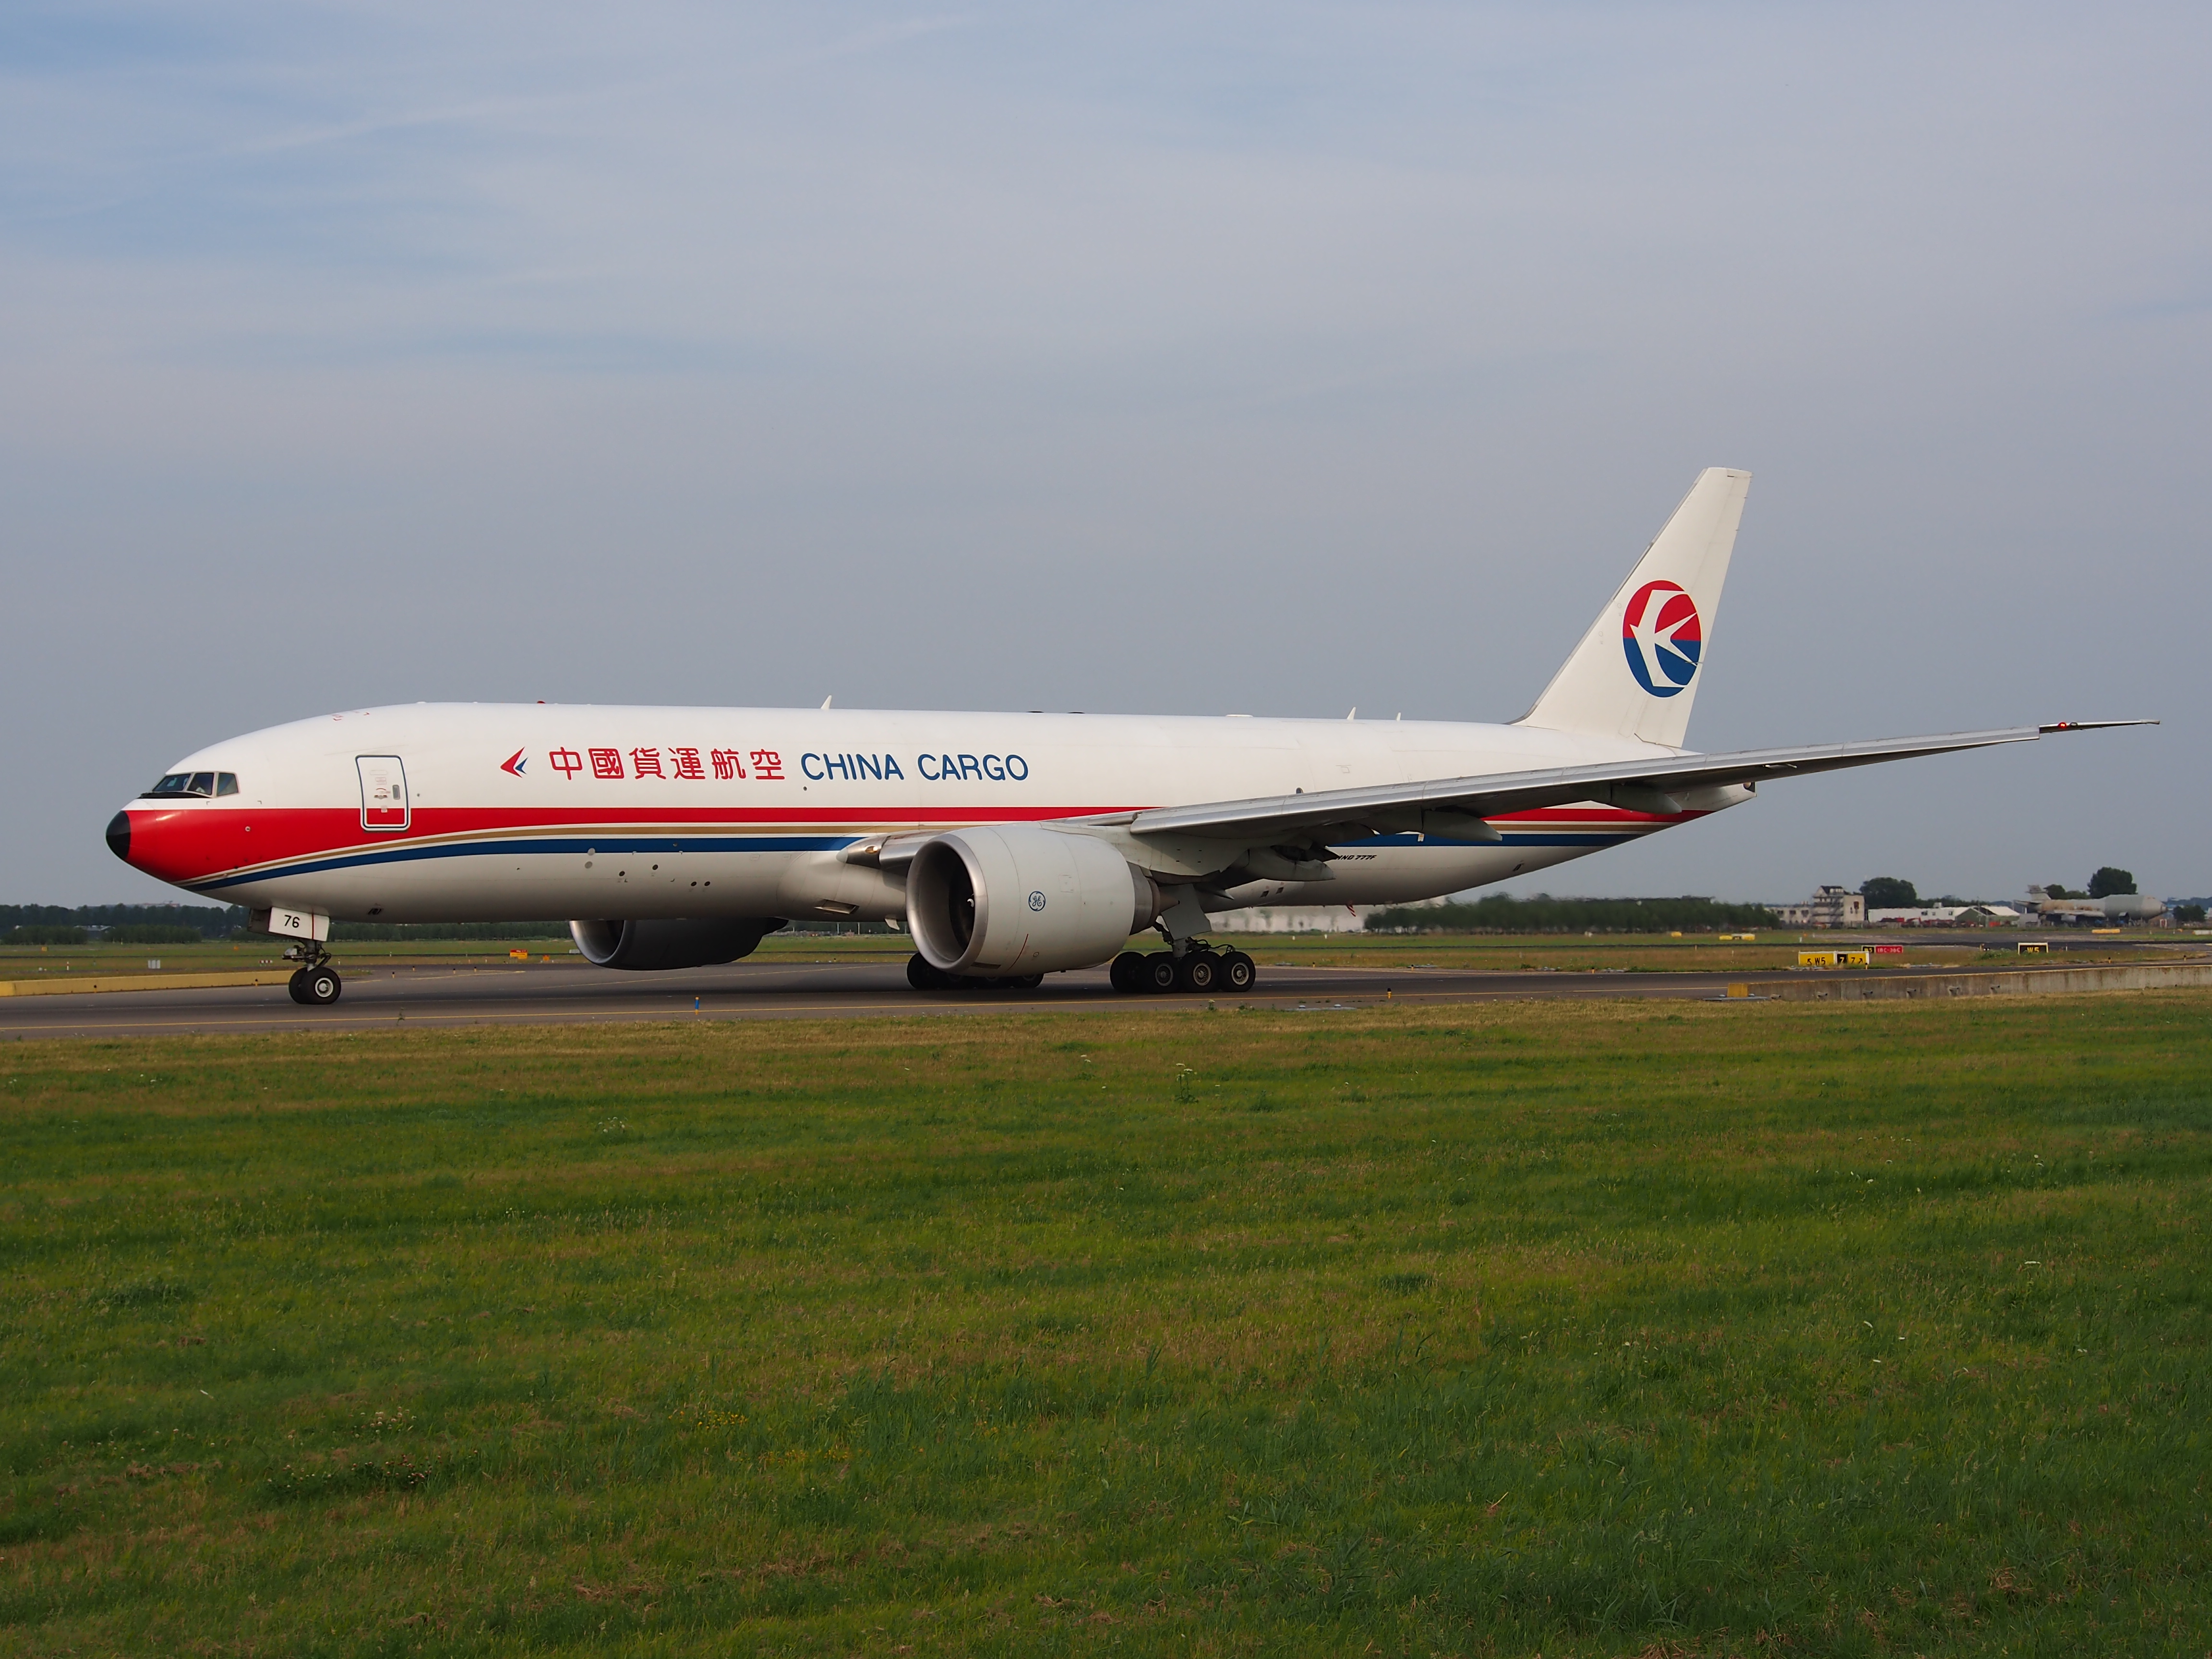 B-2076 China Cargo Airlines Boeing 777-F6N - cn 37711, taxiing 22july2013 pic-006